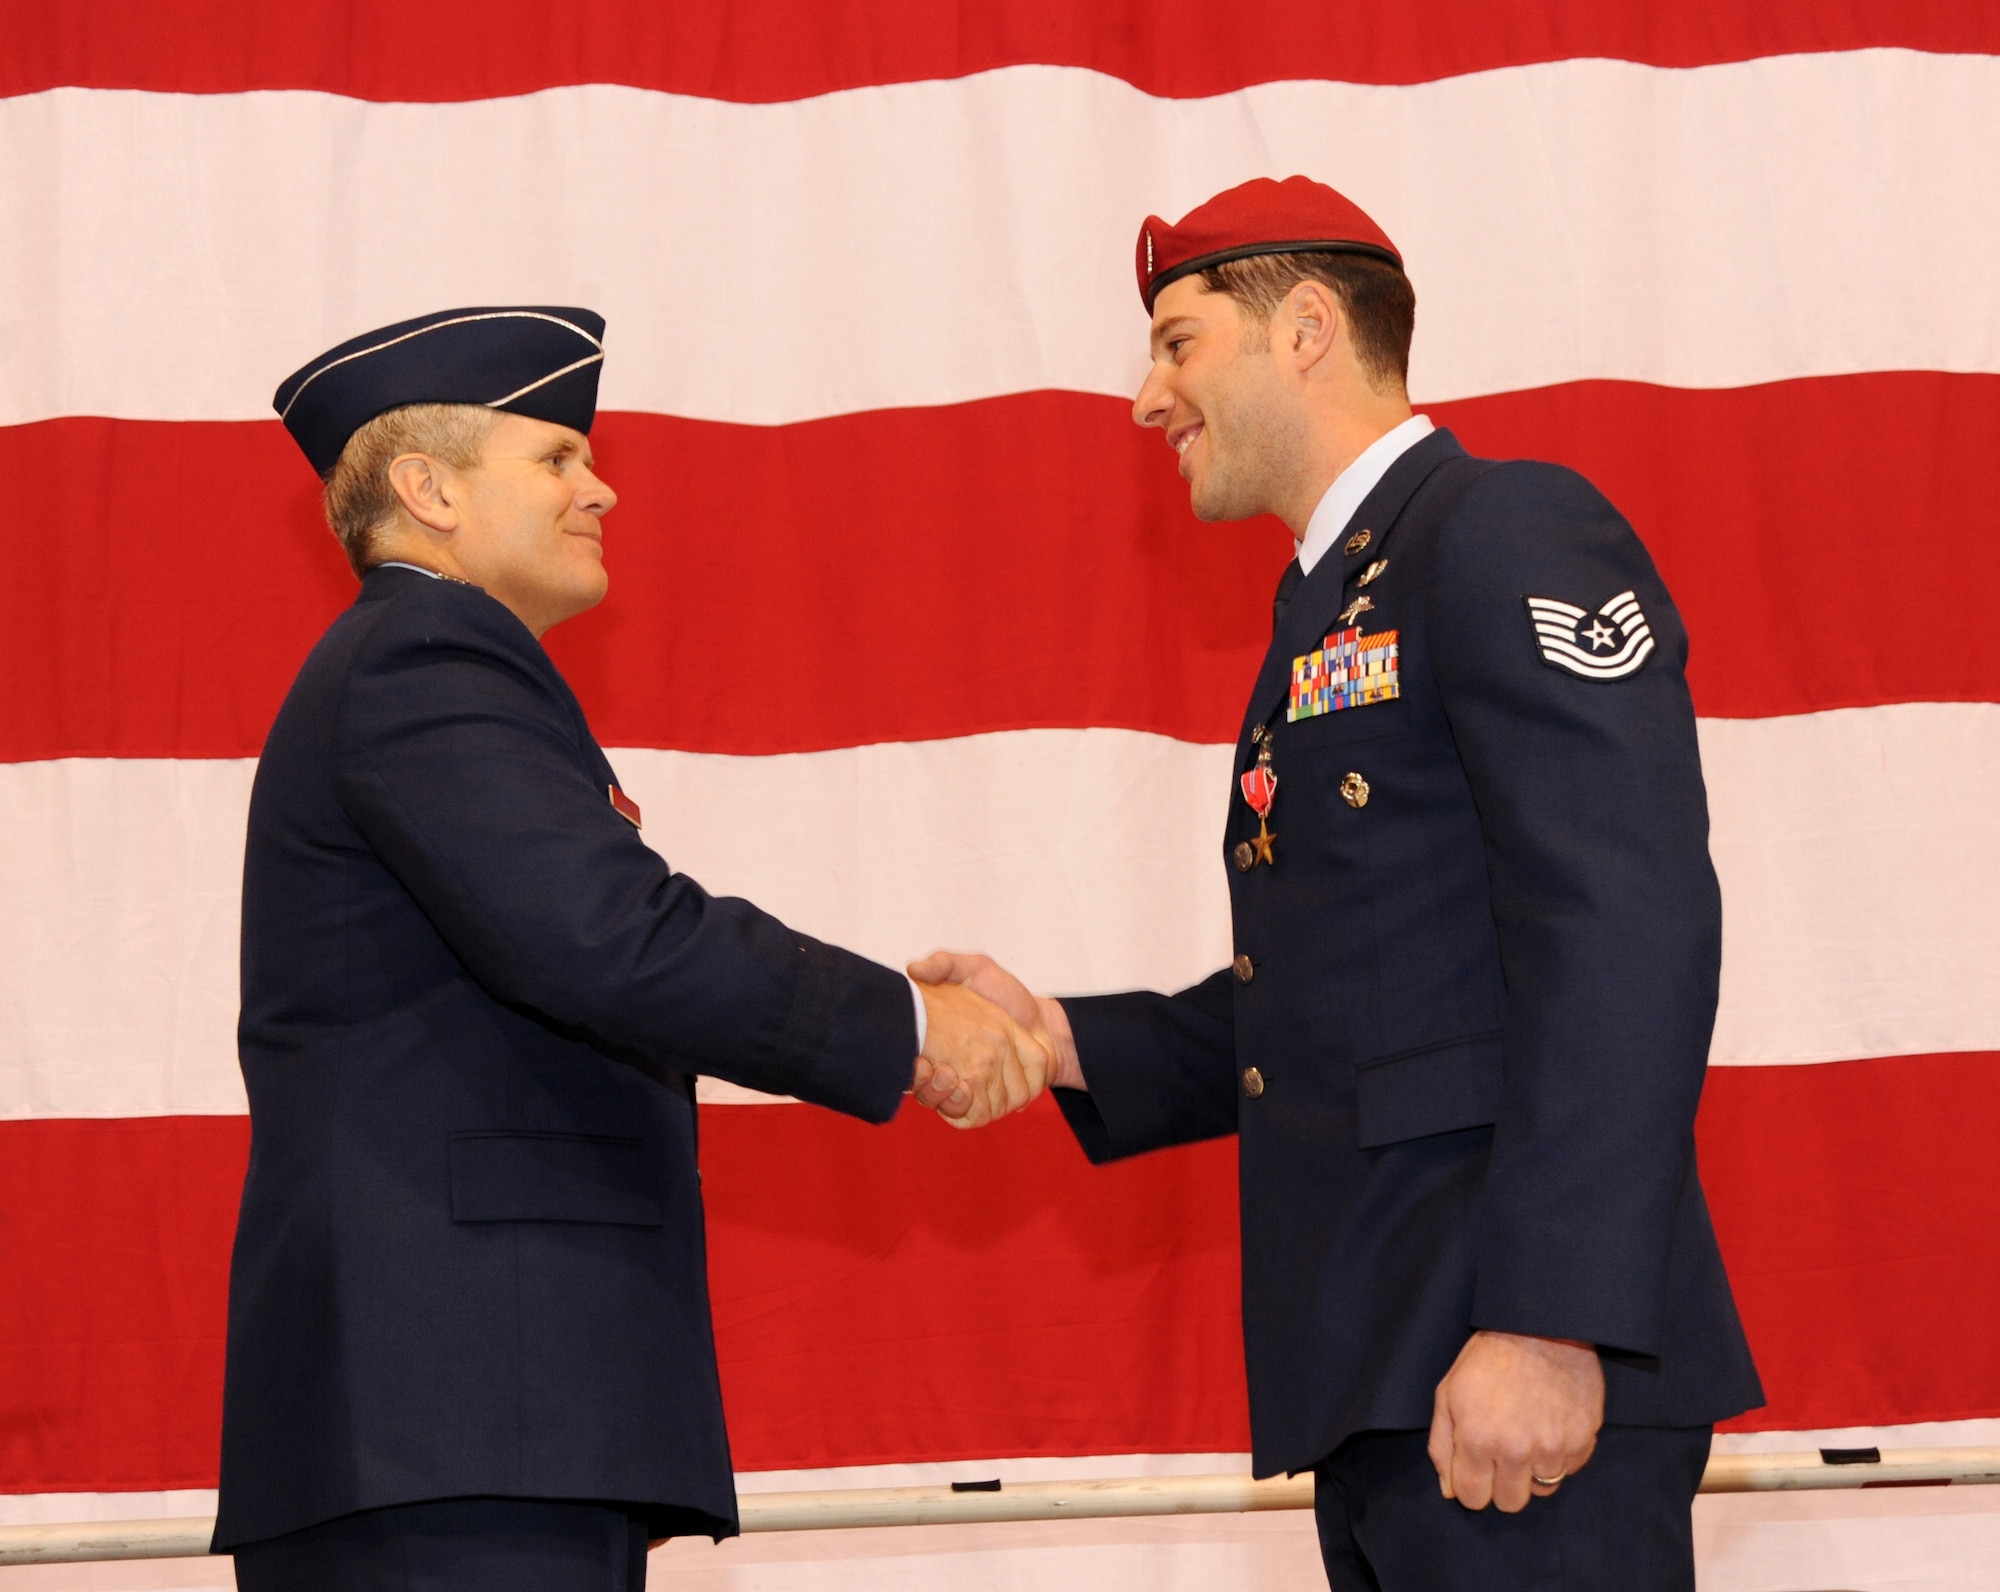 U.S. Air Force Lt. Gen. Eric E. Feil, commander of Air Force Special Operations Command, congratulates Tech. Sgt. Jeffery A. Dozelal of the 125th Special Tactics Squadron after he received his Bronze Star Medal during an award ceremony held at the Portland Air National Guard Base, Portland, Ore., Jan. 23.  The event honored Airmen from the unit with five Bronze Star Medals and one Purple Heart medal.  The Airmen earned the medals during recent deployments to the Middle East. Fiel flew in from AFSOC headquarters at Hulburt Field, Fla., for the ceremony (U.S. Air Force photo by Tech. Sgt. John Hughel, 142nd Fighter Wing Public Affairs/Released))